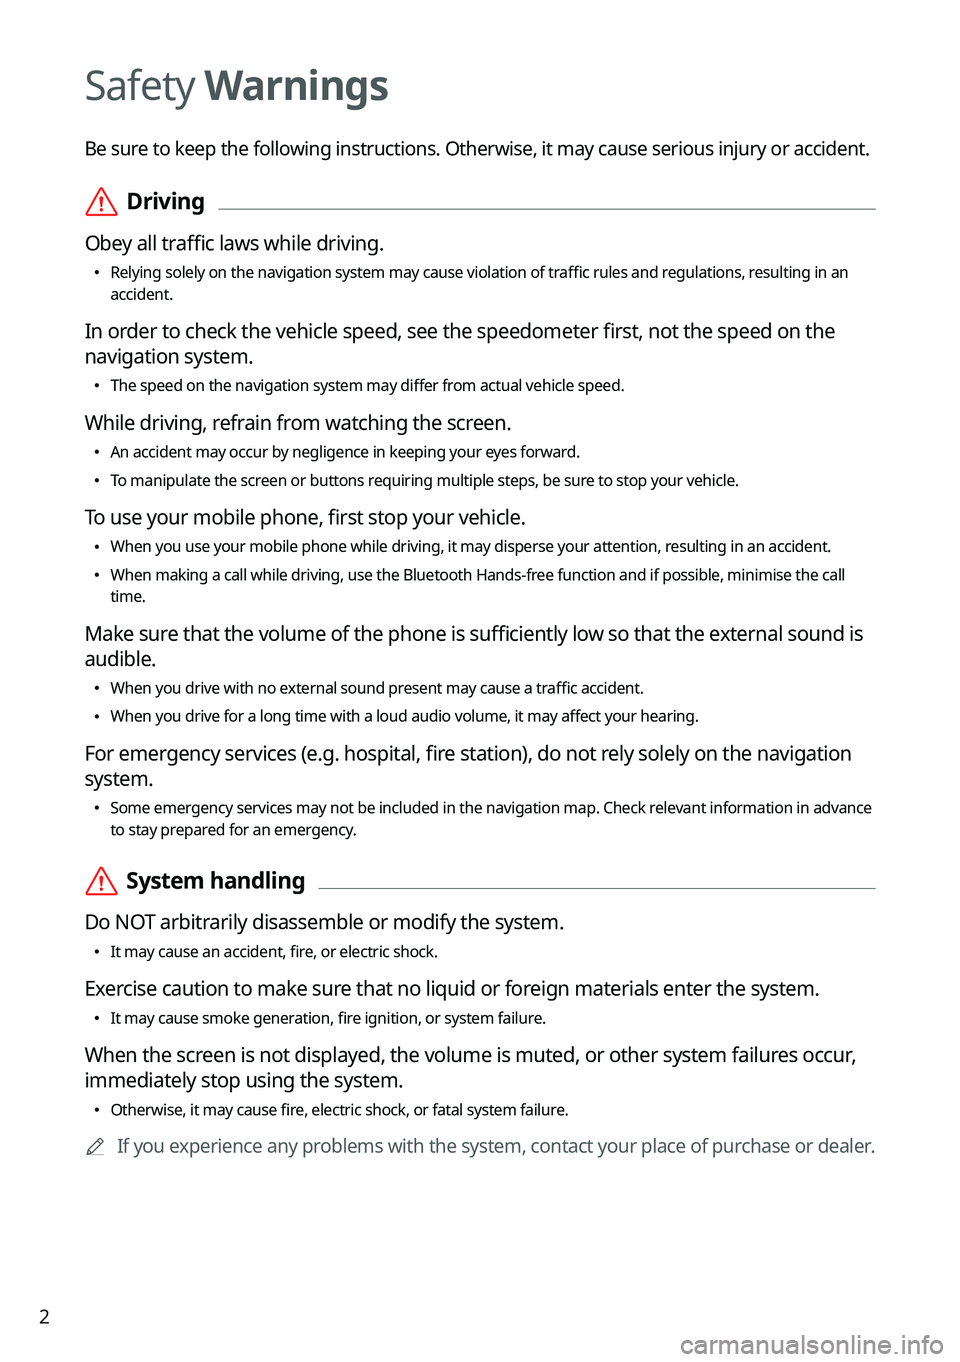 KIA SPORTAGE PHEV 2023  Navigation System Quick Reference Guide 2
Safety Warnings
Be sure to keep the following instructions. Otherwise, it may cause serious injury or accident.
 ÝDriving
Obey all traffic laws while driving.
 •
Relying solely on the navigation 